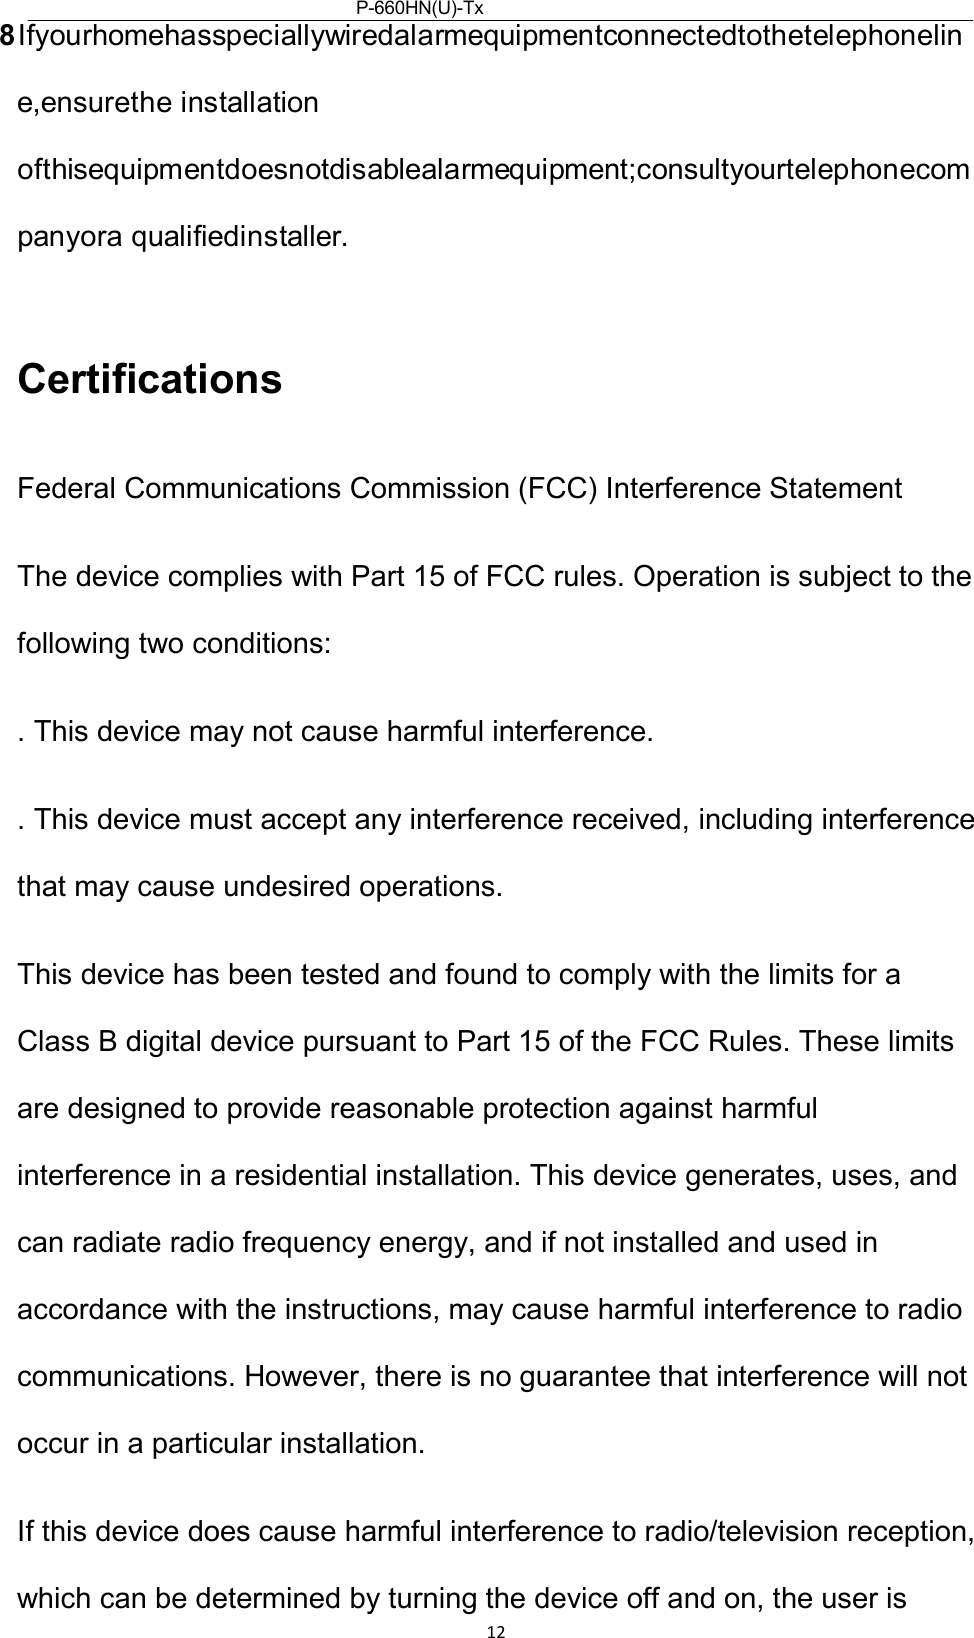 P-660HN(U)-Tx v2QuickStartGuide  12  8Ifyourhomehasspeciallywiredalarmequipmentconnectedtothetelephoneline,ensurethe installation ofthisequipmentdoesnotdisablealarmequipment;consultyourtelephonecompanyora qualifiedinstaller.  Certifications  Federal Communications Commission (FCC) Interference Statement  The device complies with Part 15 of FCC rules. Operation is subject to the following two conditions:  . This device may not cause harmful interference.  . This device must accept any interference received, including interference that may cause undesired operations.  This device has been tested and found to comply with the limits for a Class B digital device pursuant to Part 15 of the FCC Rules. These limits are designed to provide reasonable protection against harmful interference in a residential installation. This device generates, uses, and can radiate radio frequency energy, and if not installed and used in accordance with the instructions, may cause harmful interference to radio communications. However, there is no guarantee that interference will not occur in a particular installation.  If this device does cause harmful interference to radio/television reception, which can be determined by turning the device off and on, the user is 